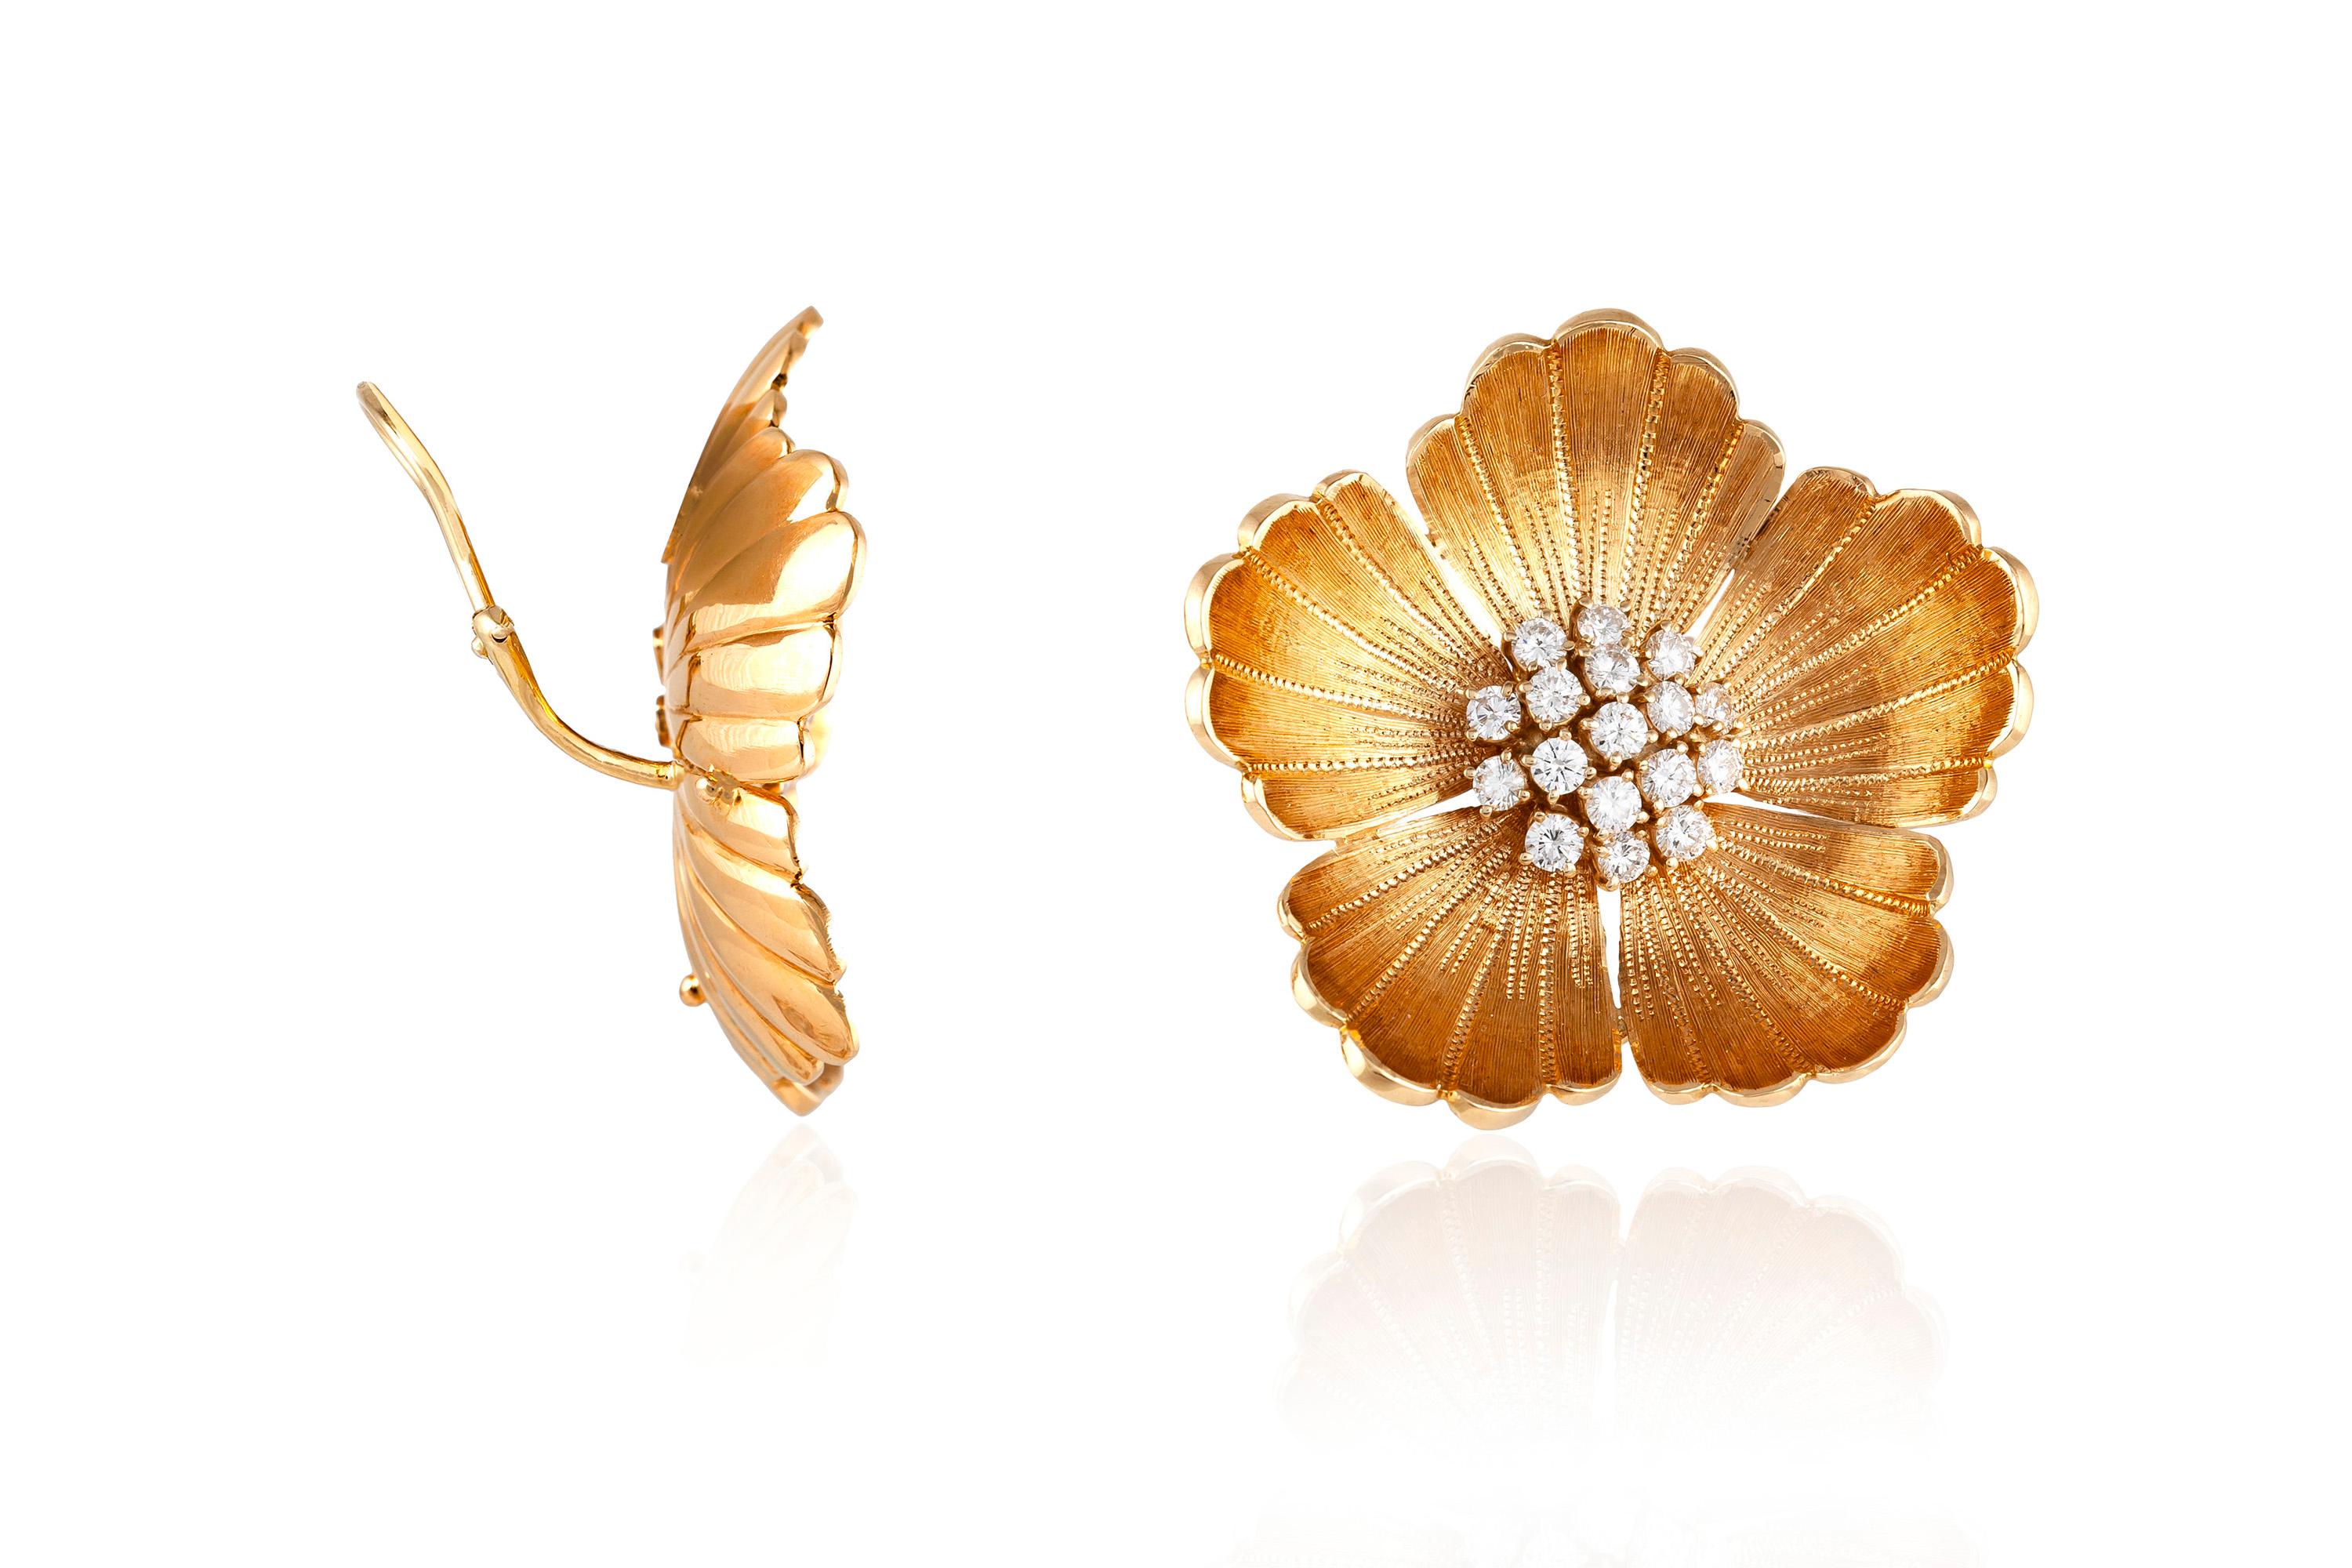 Vintage flower earrings, finely crafted in 18 k yellow gold with brilliant cut diamond clusters at the center, weighing a total of approximately 4.00 carat.